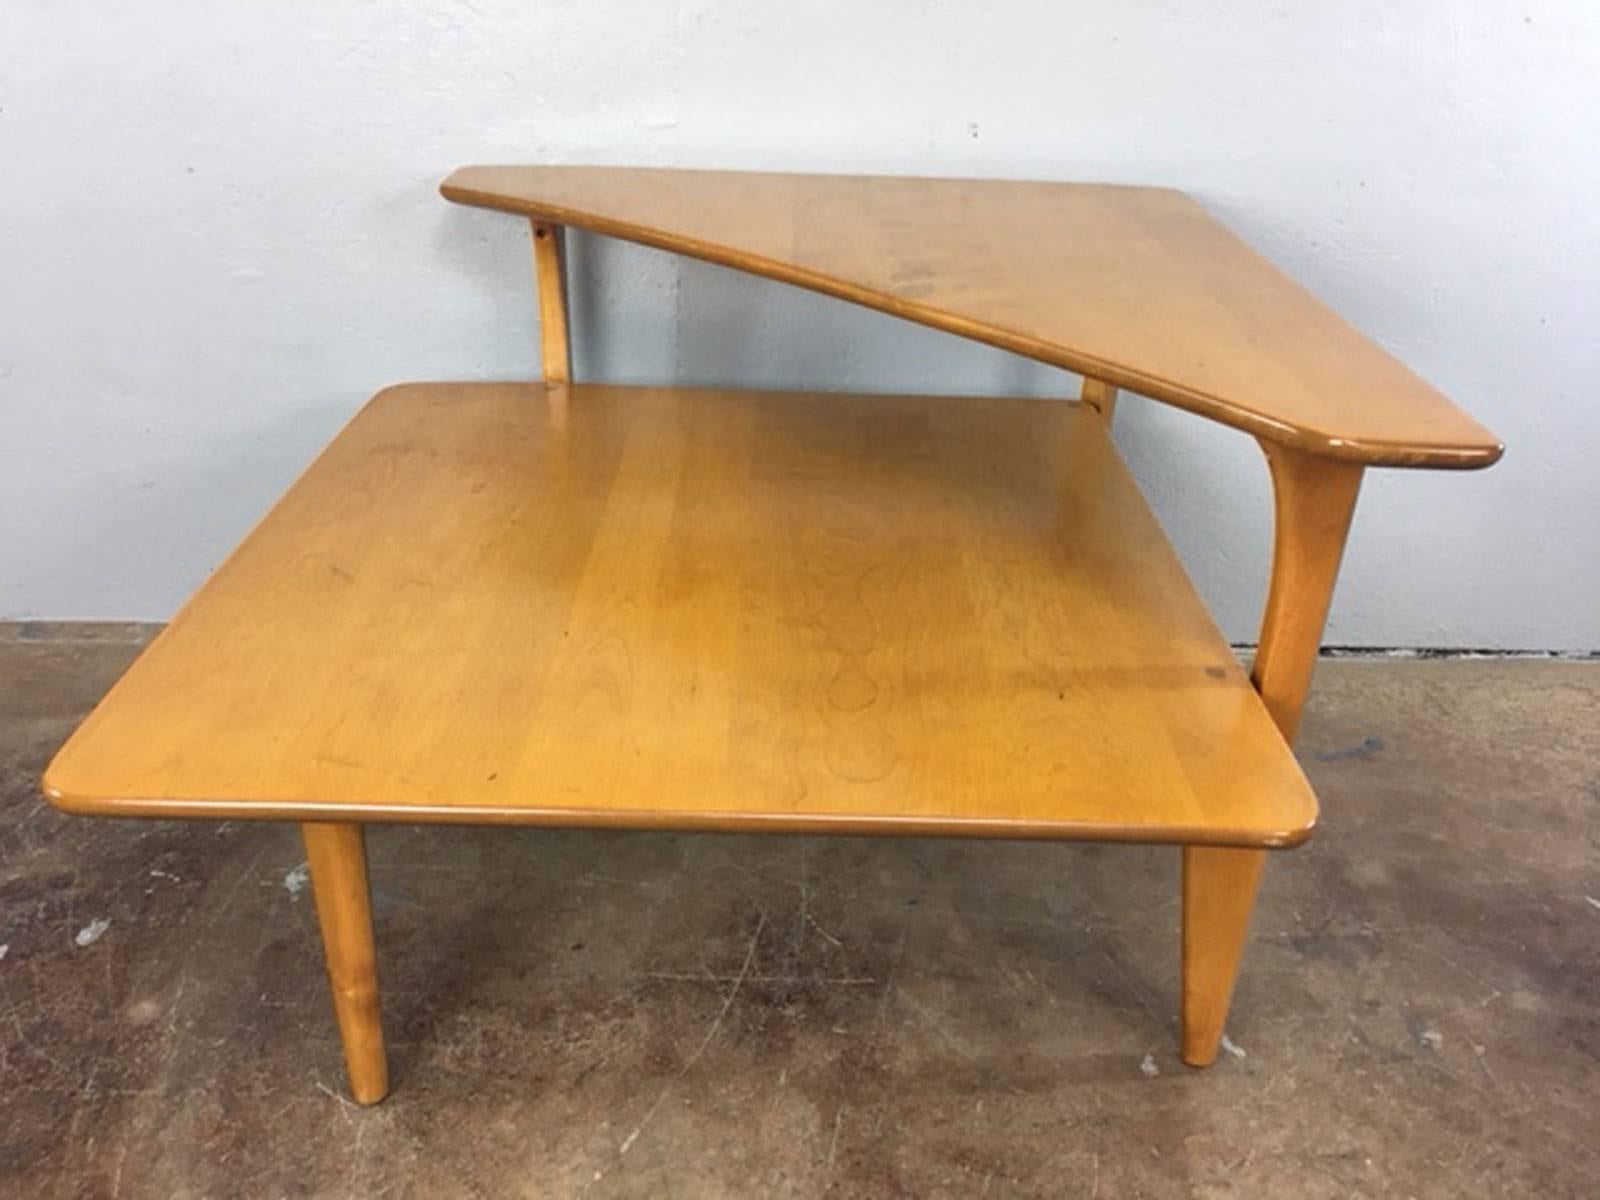 1950s solid maple wood corner table by Heywood-Wakefield. Original acquisition condition. Completely useable as is. If desire a perfect finish the solid wood of this table makes it very easy to take apart and refinish.